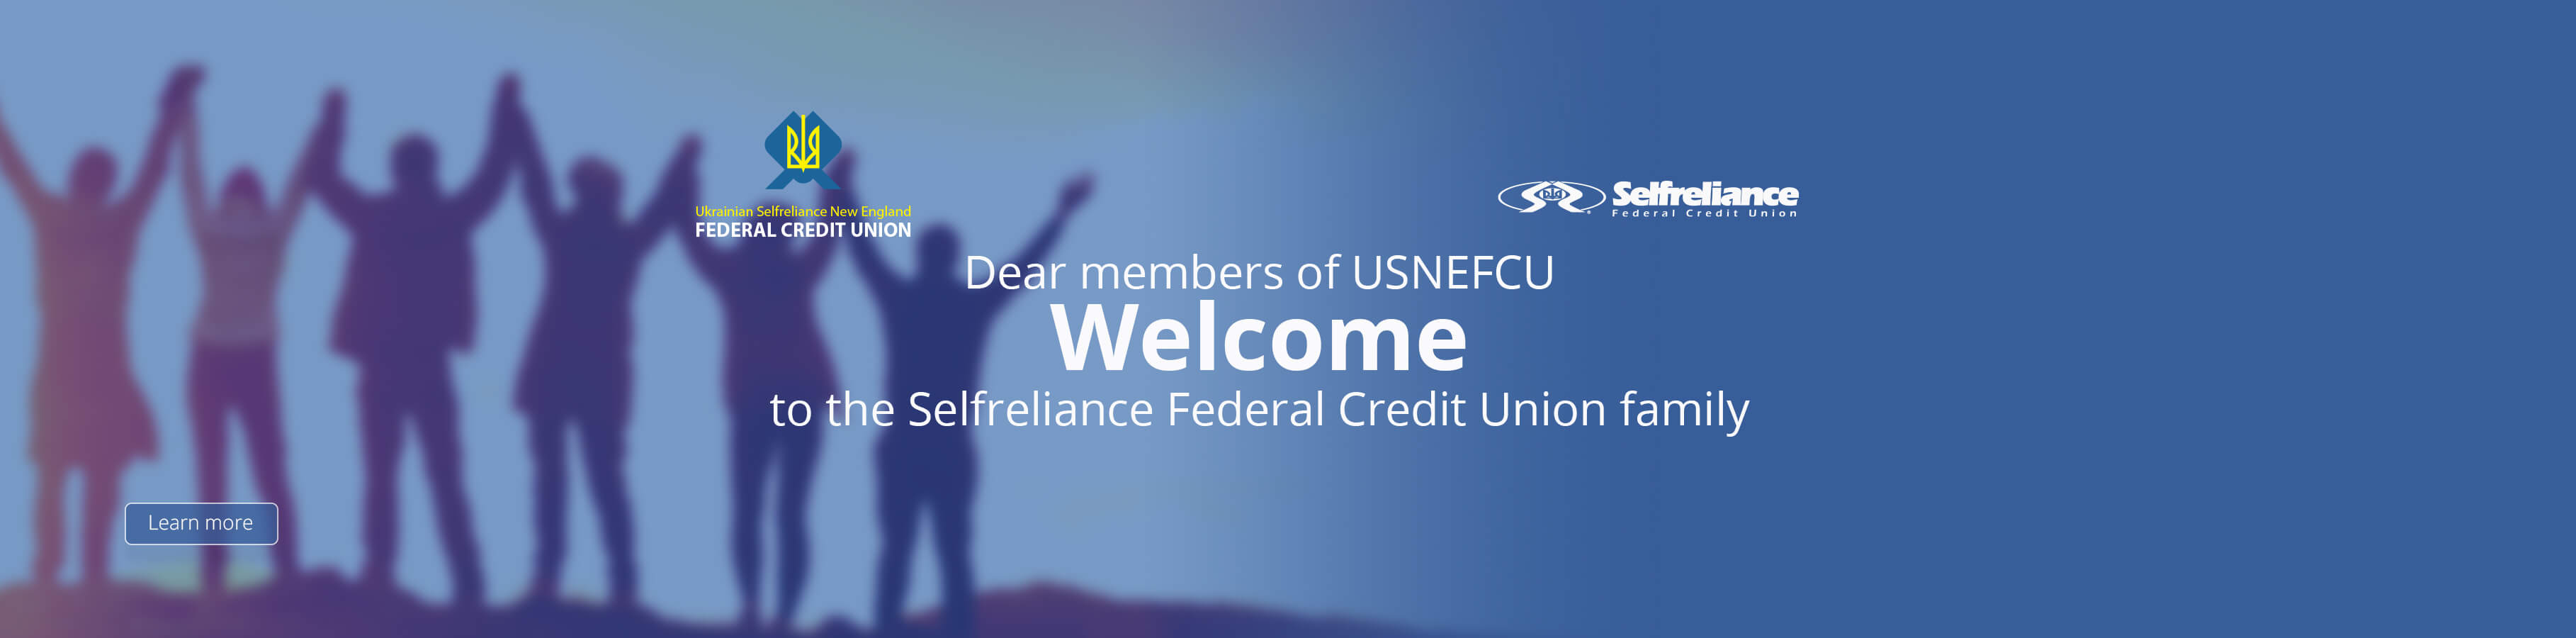 Dear members of USNEFCU Welcome to the Selfreliance Federal Credit Union family. Learn more